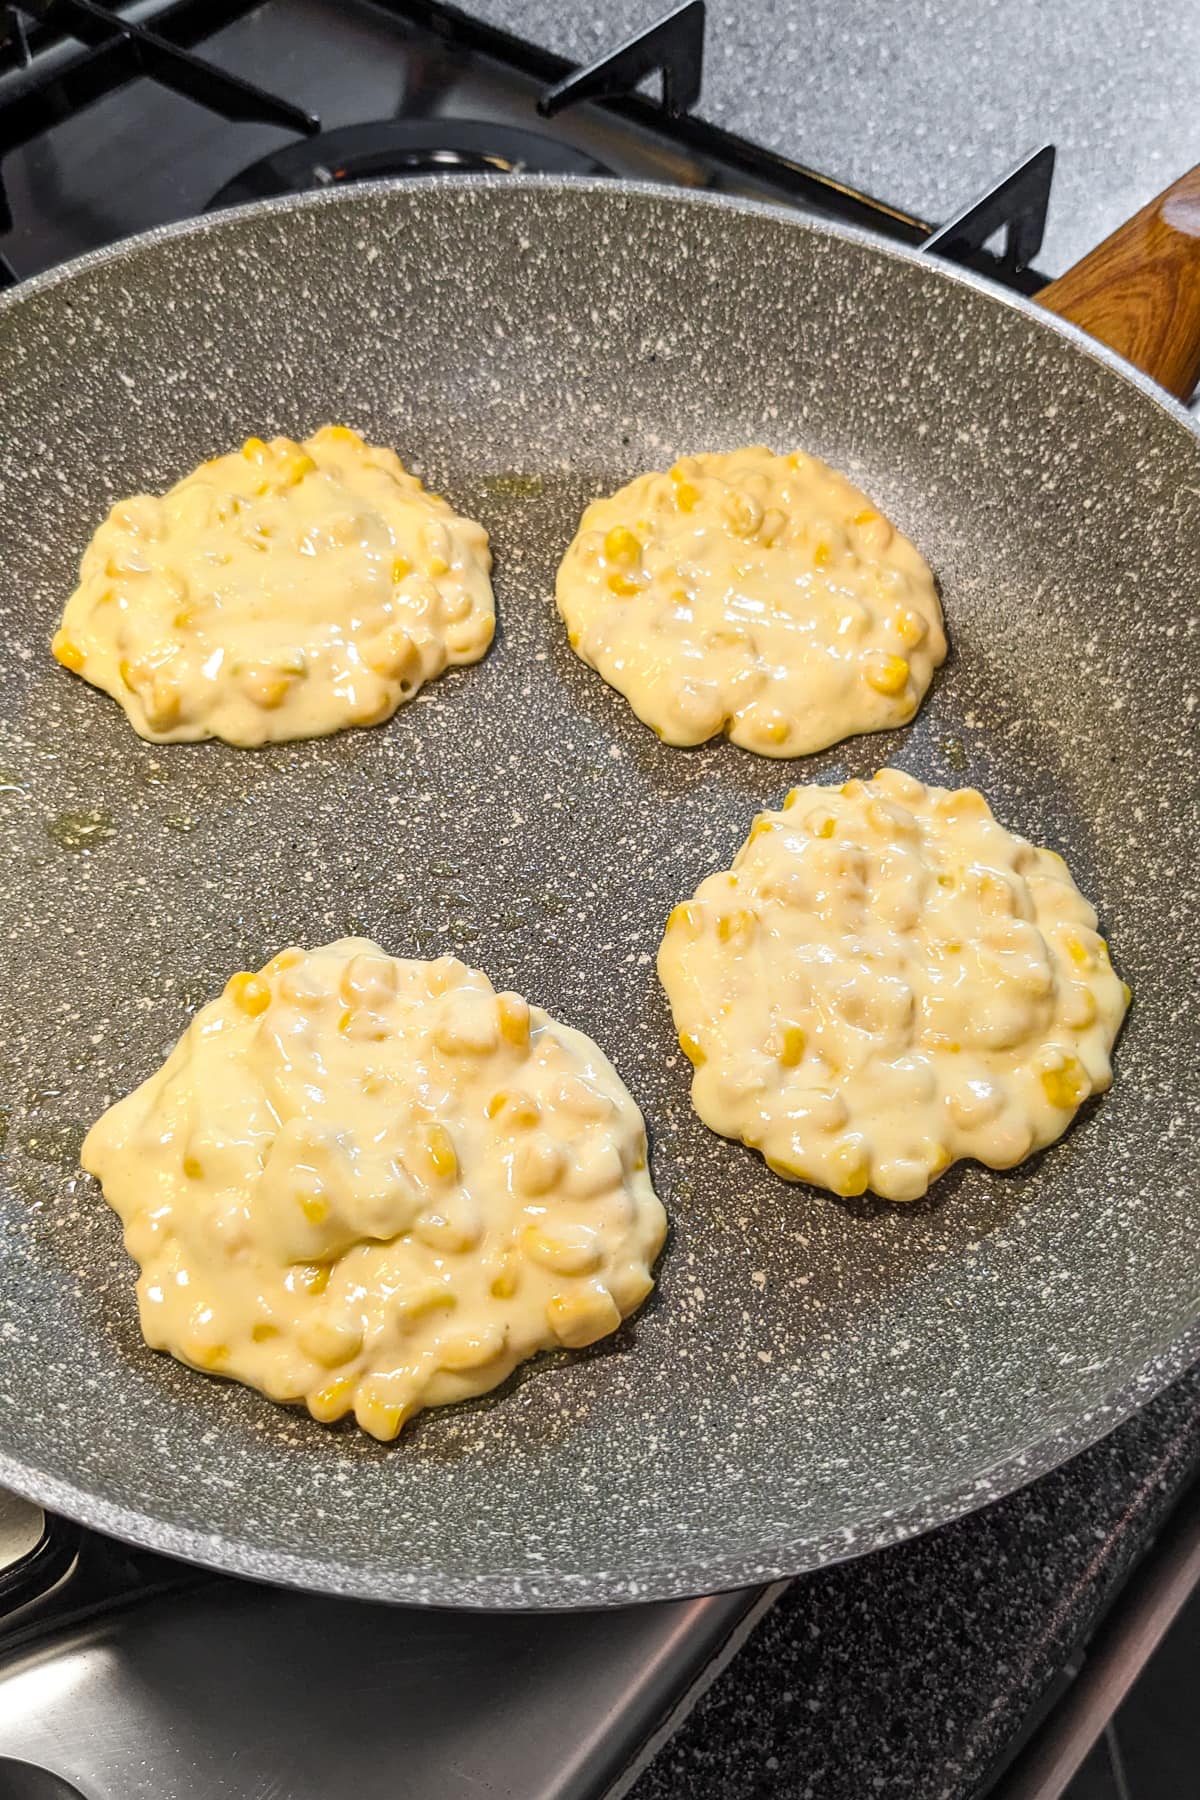 4 corn fritters frying in a frying pan on the stove.